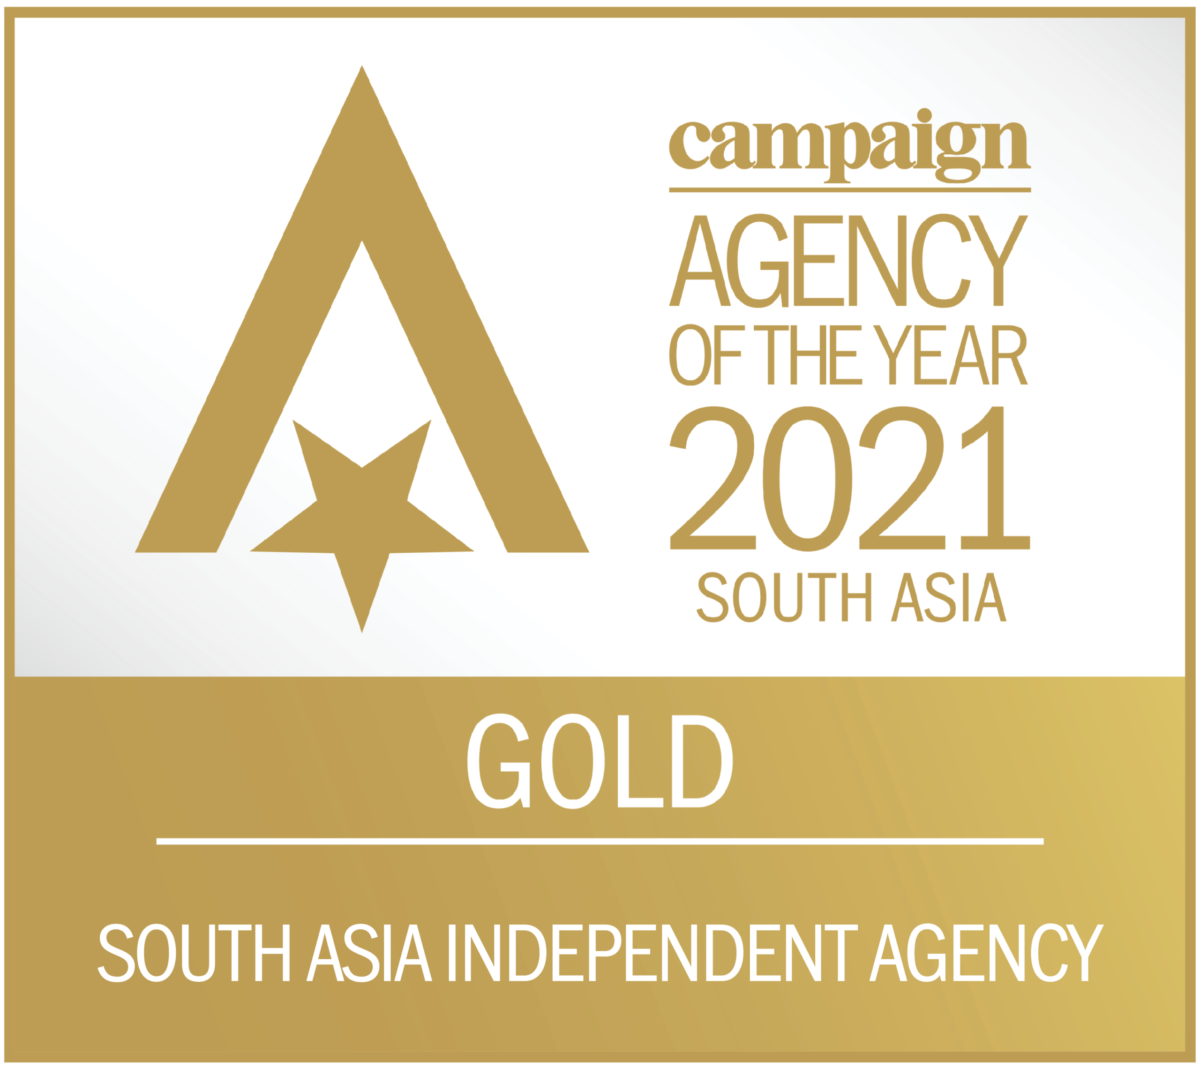 South Asia Independent Agency Gold